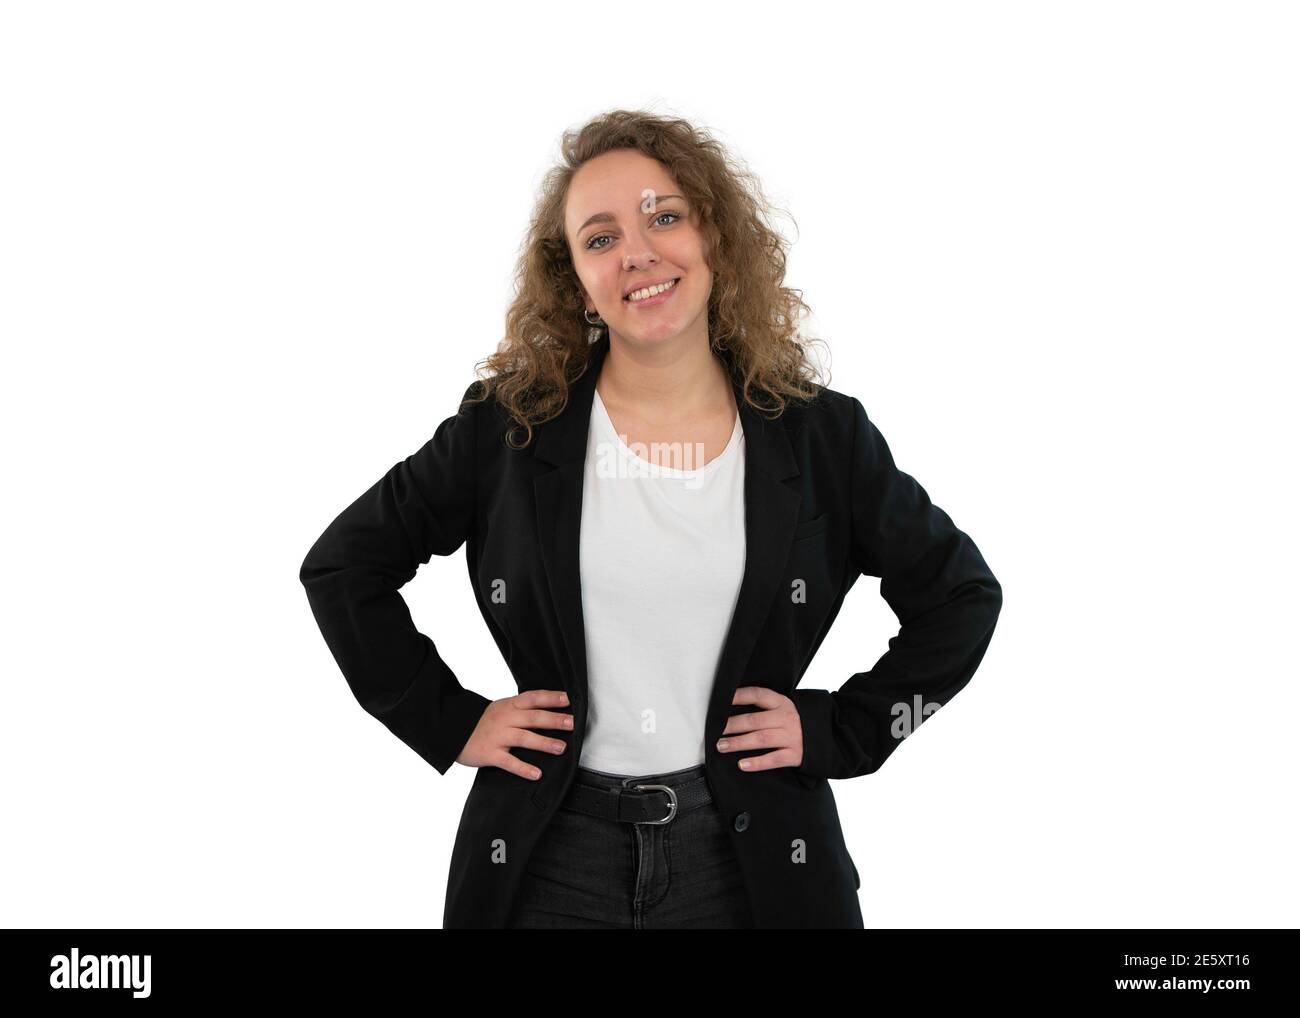 Smiling business woman wearing suit and hands on hips. Isolated on white background. Stock Photo